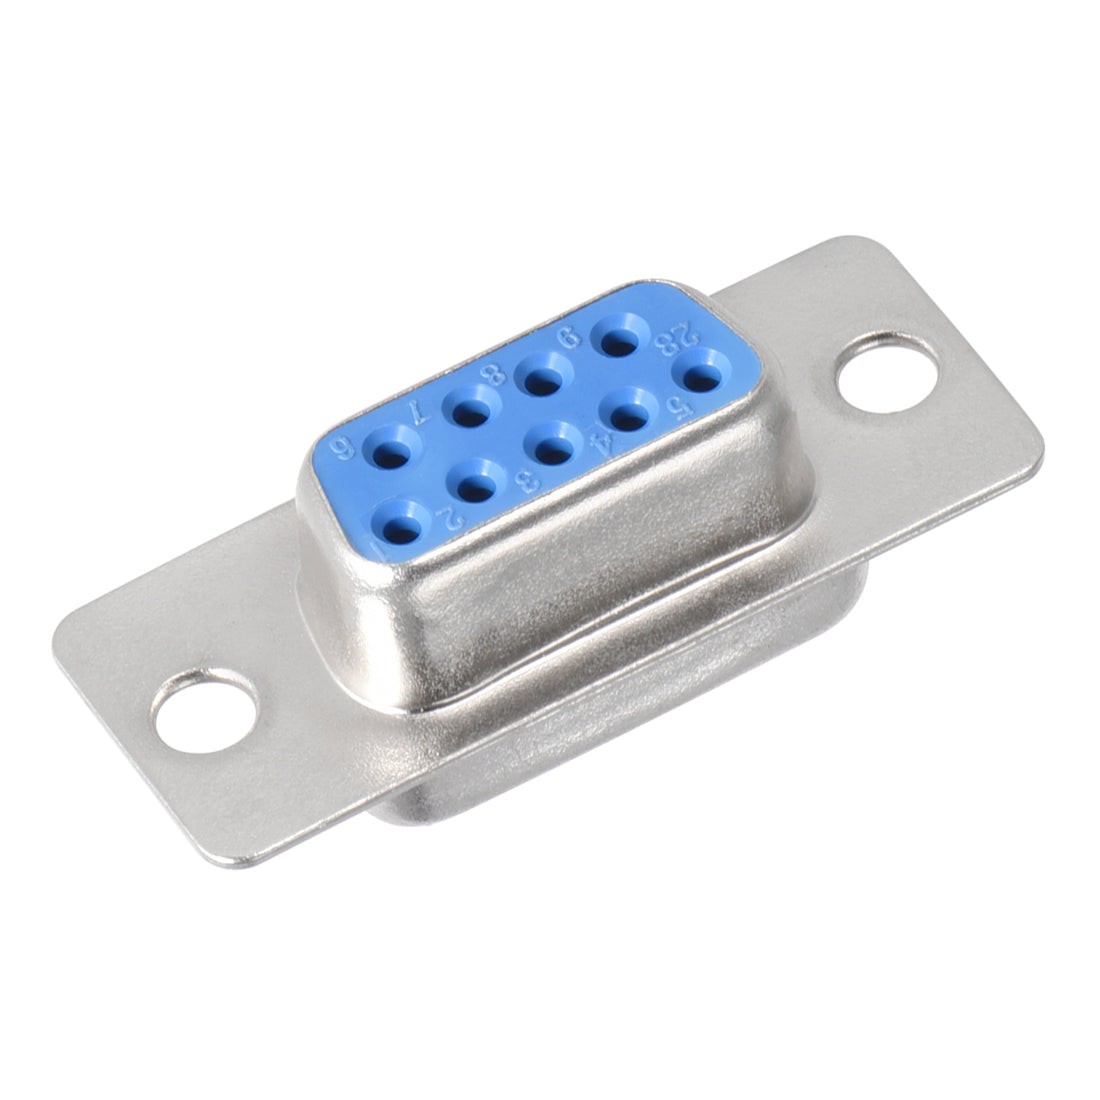 uxcell Uxcell D-sub Connector DB9 Female Socket 9-pin 2-row Port Terminal Breakout for Mechanical Equipment CNC Computers Blue 5pcs